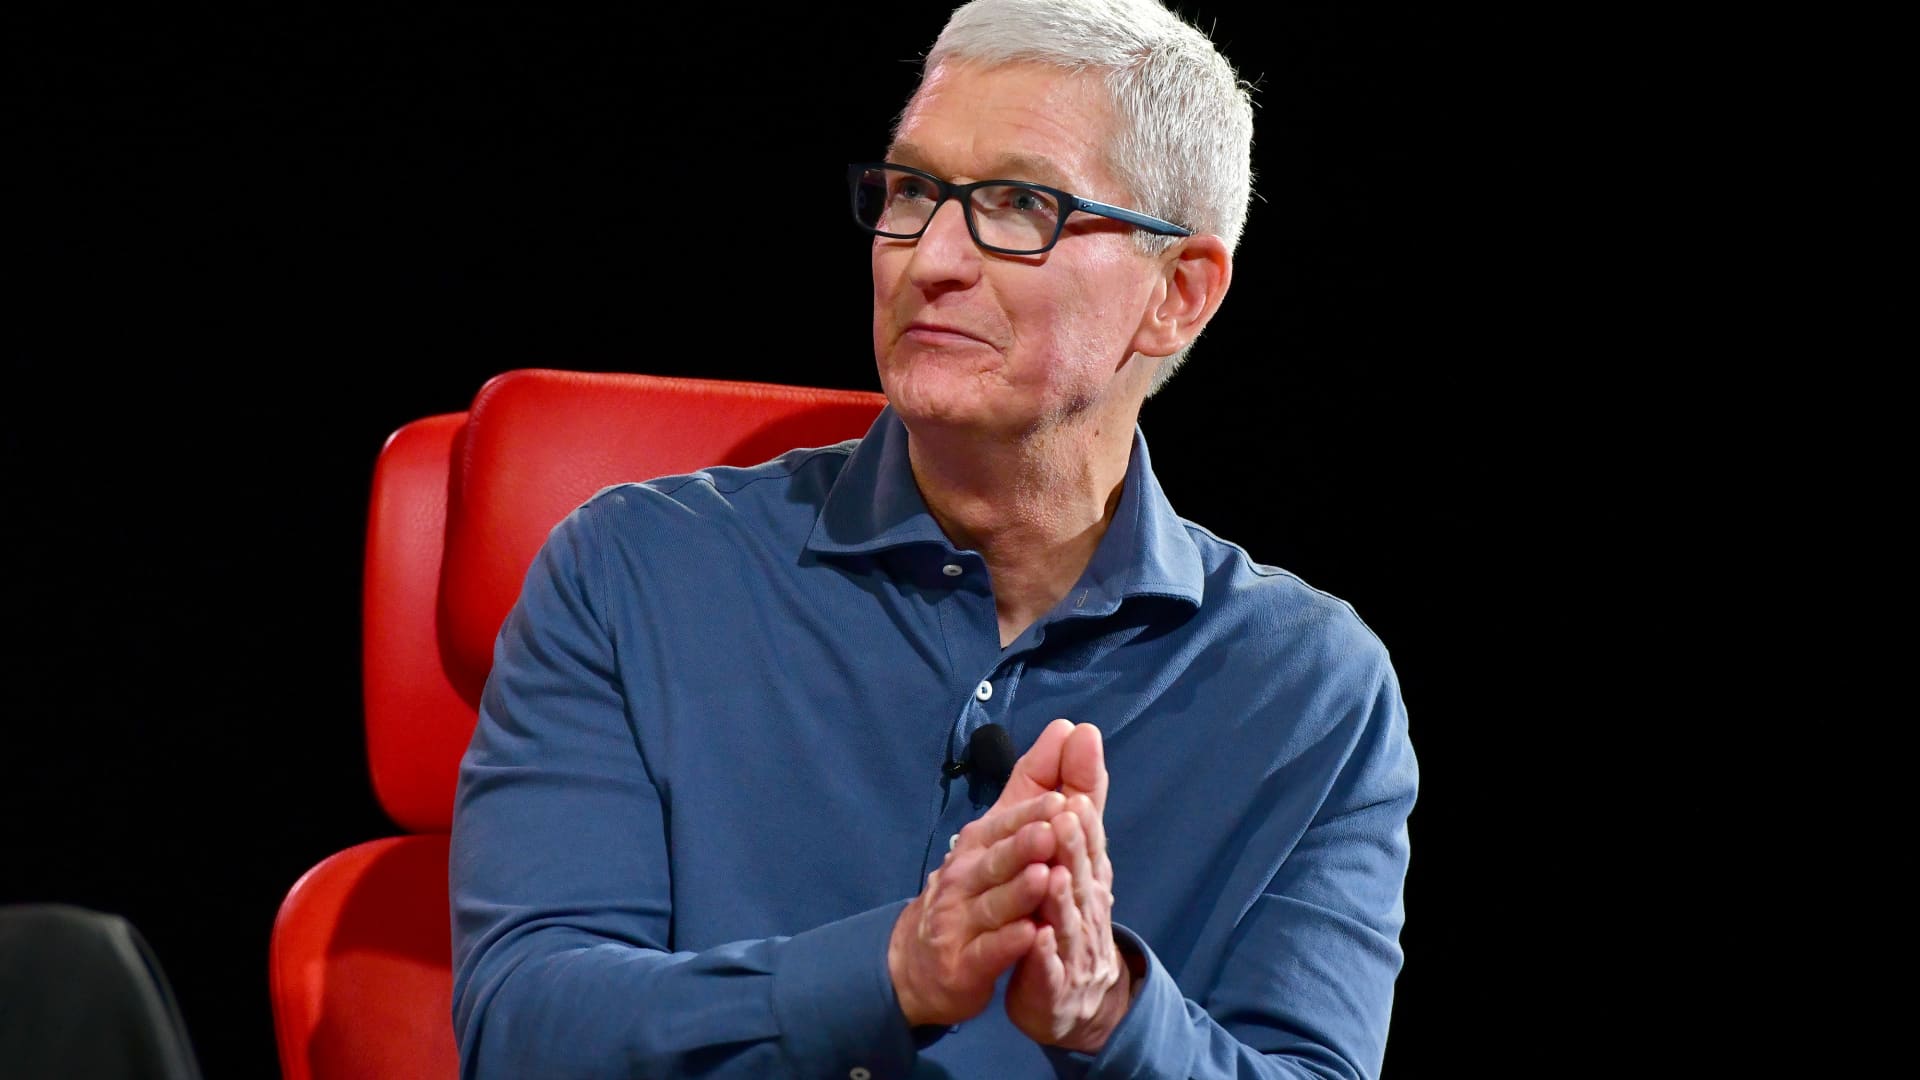 Apple CEO Tim Cook speaks onstage during day 2 of Vox Media's 2022 Code Conference in Beverly Hills, California.